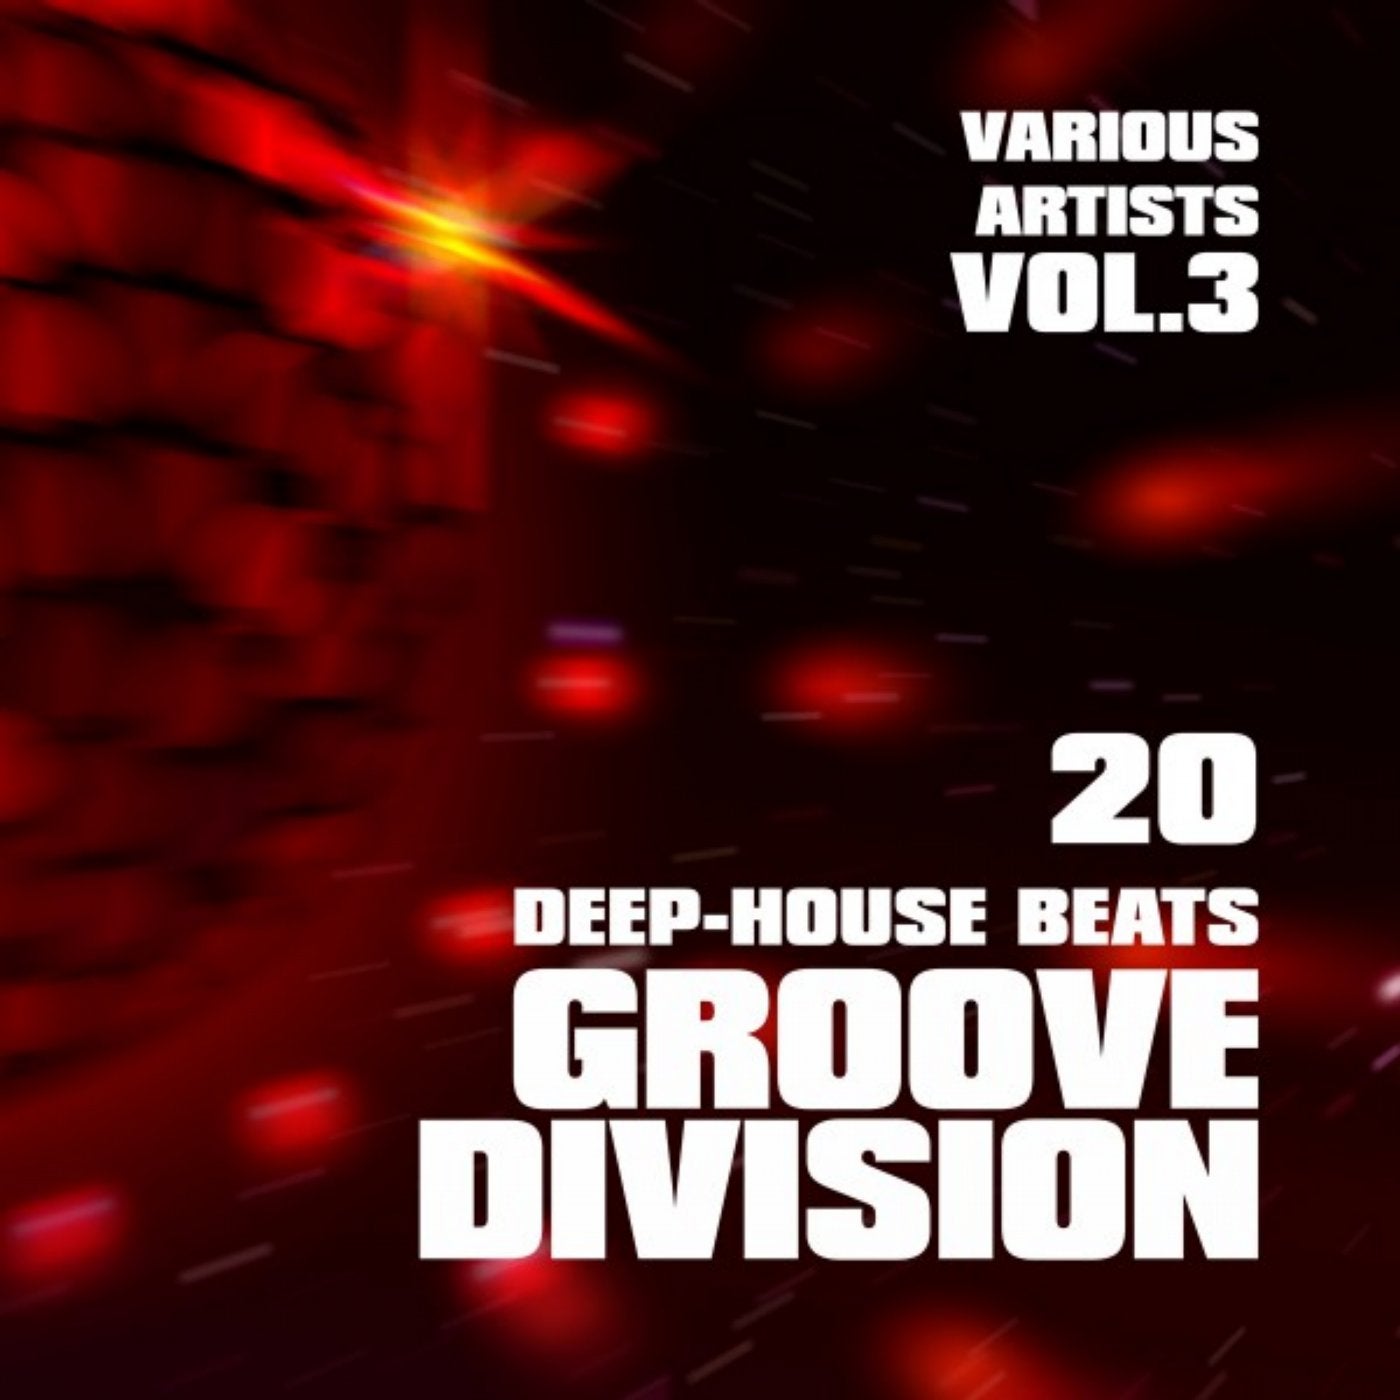 Groove Division (20 Deep-House Beats), Vol. 3